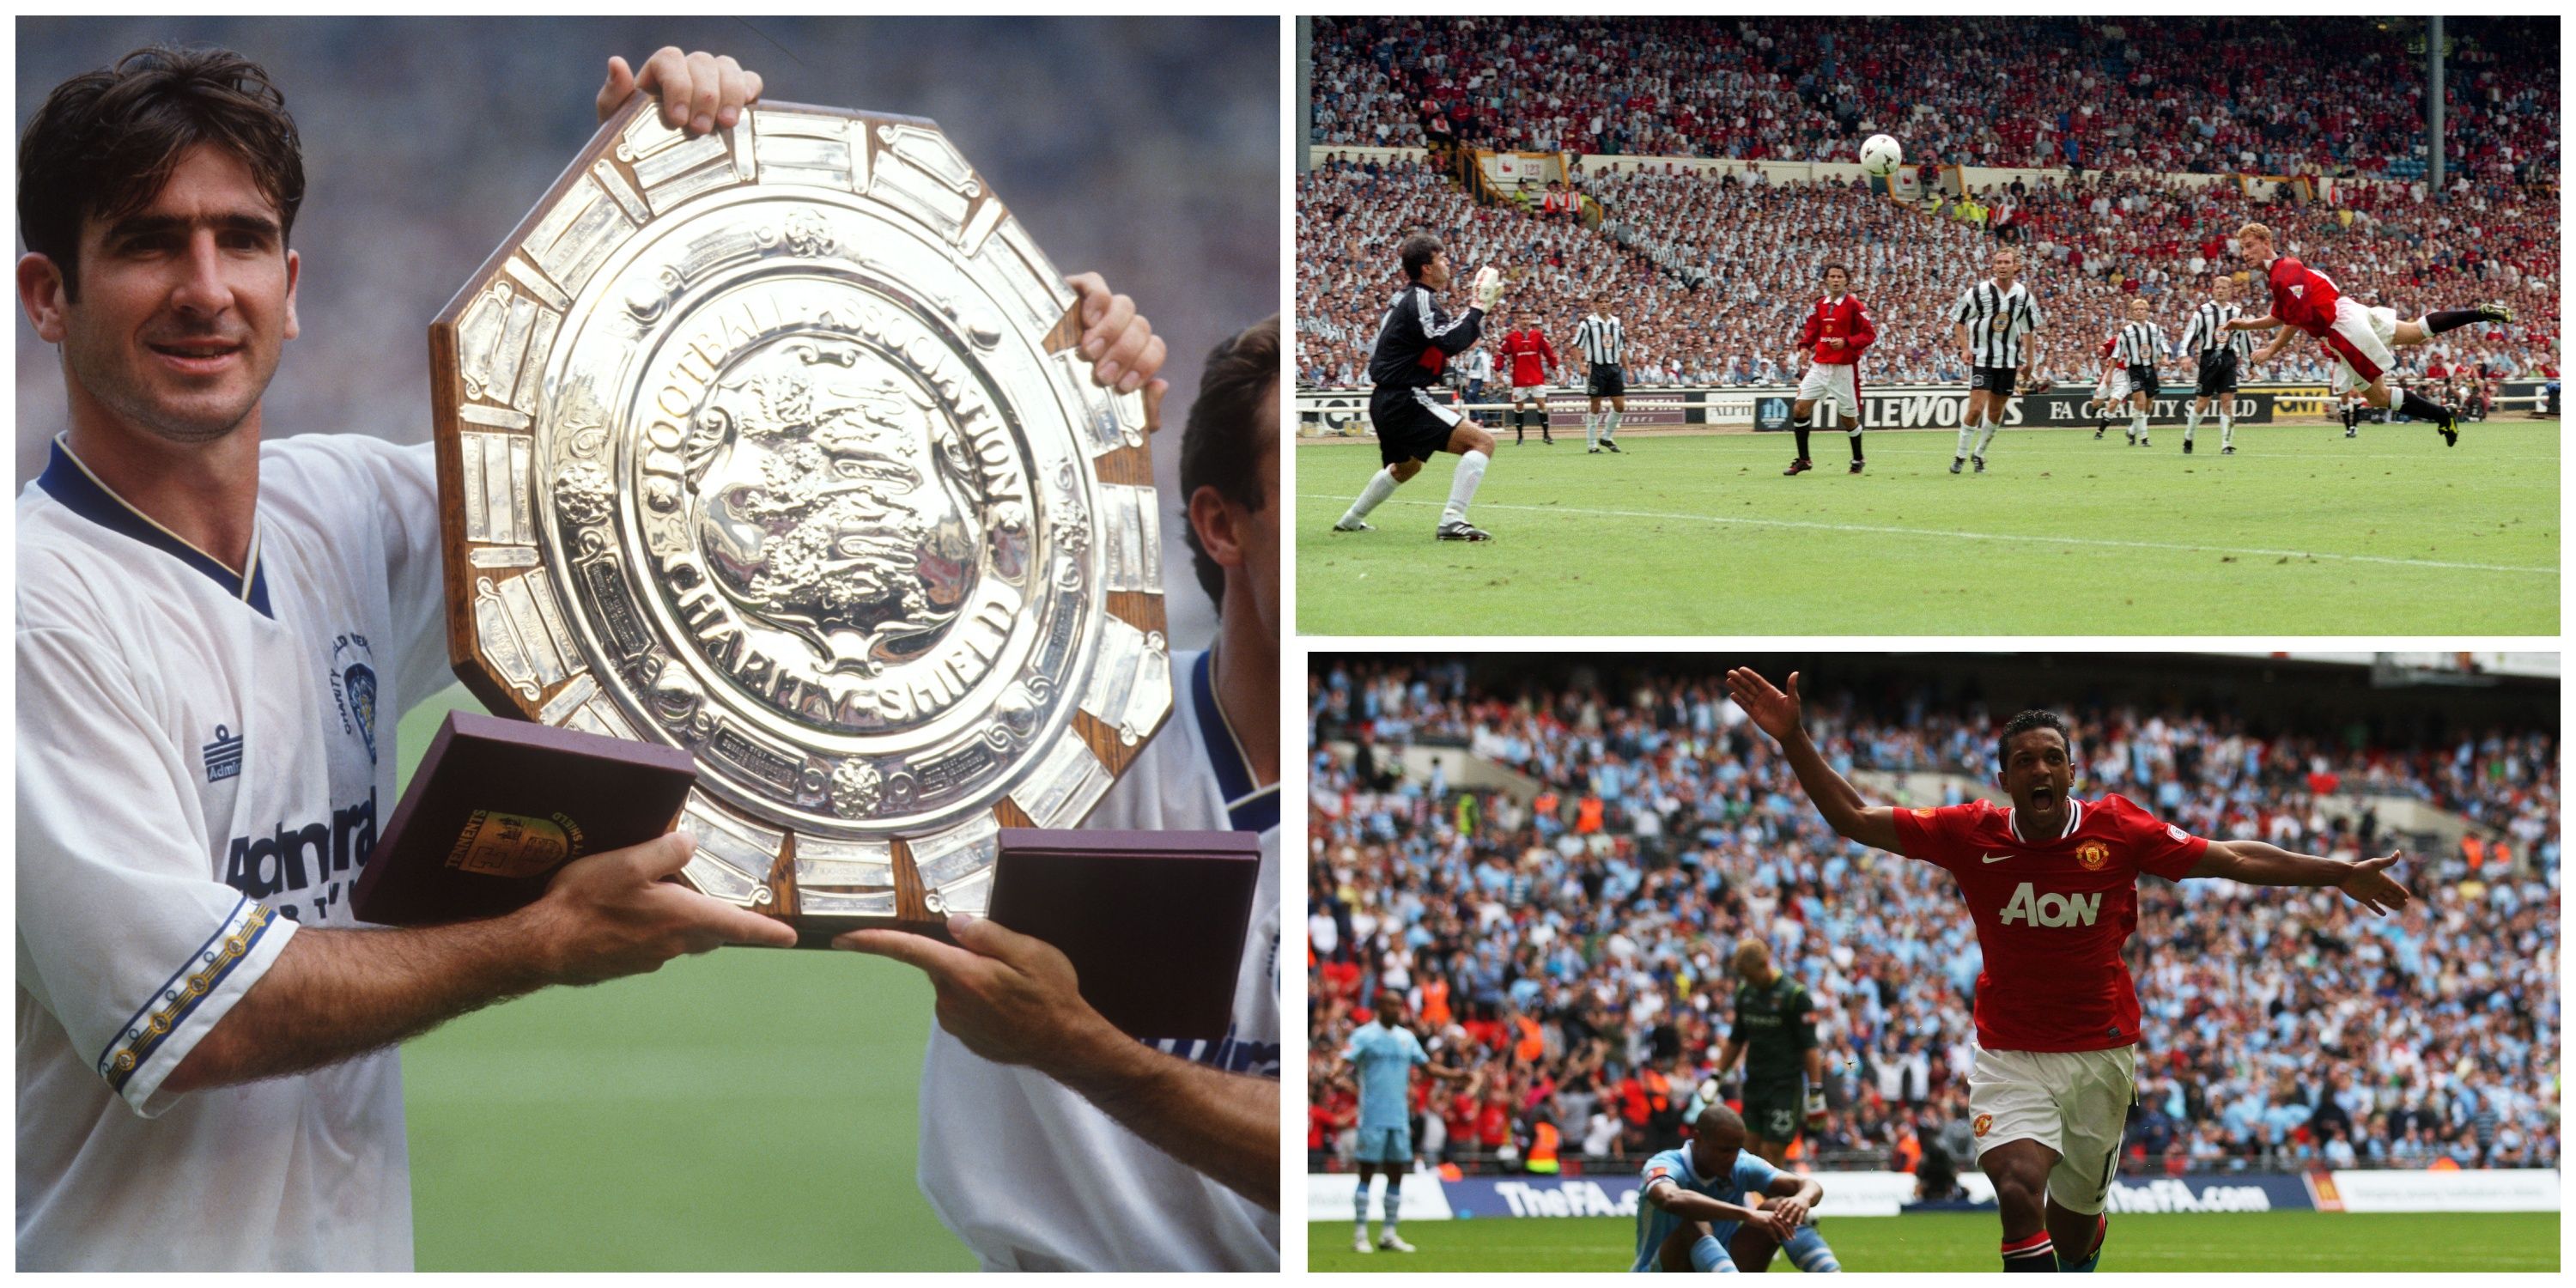 A collage of classic Community Shield games.